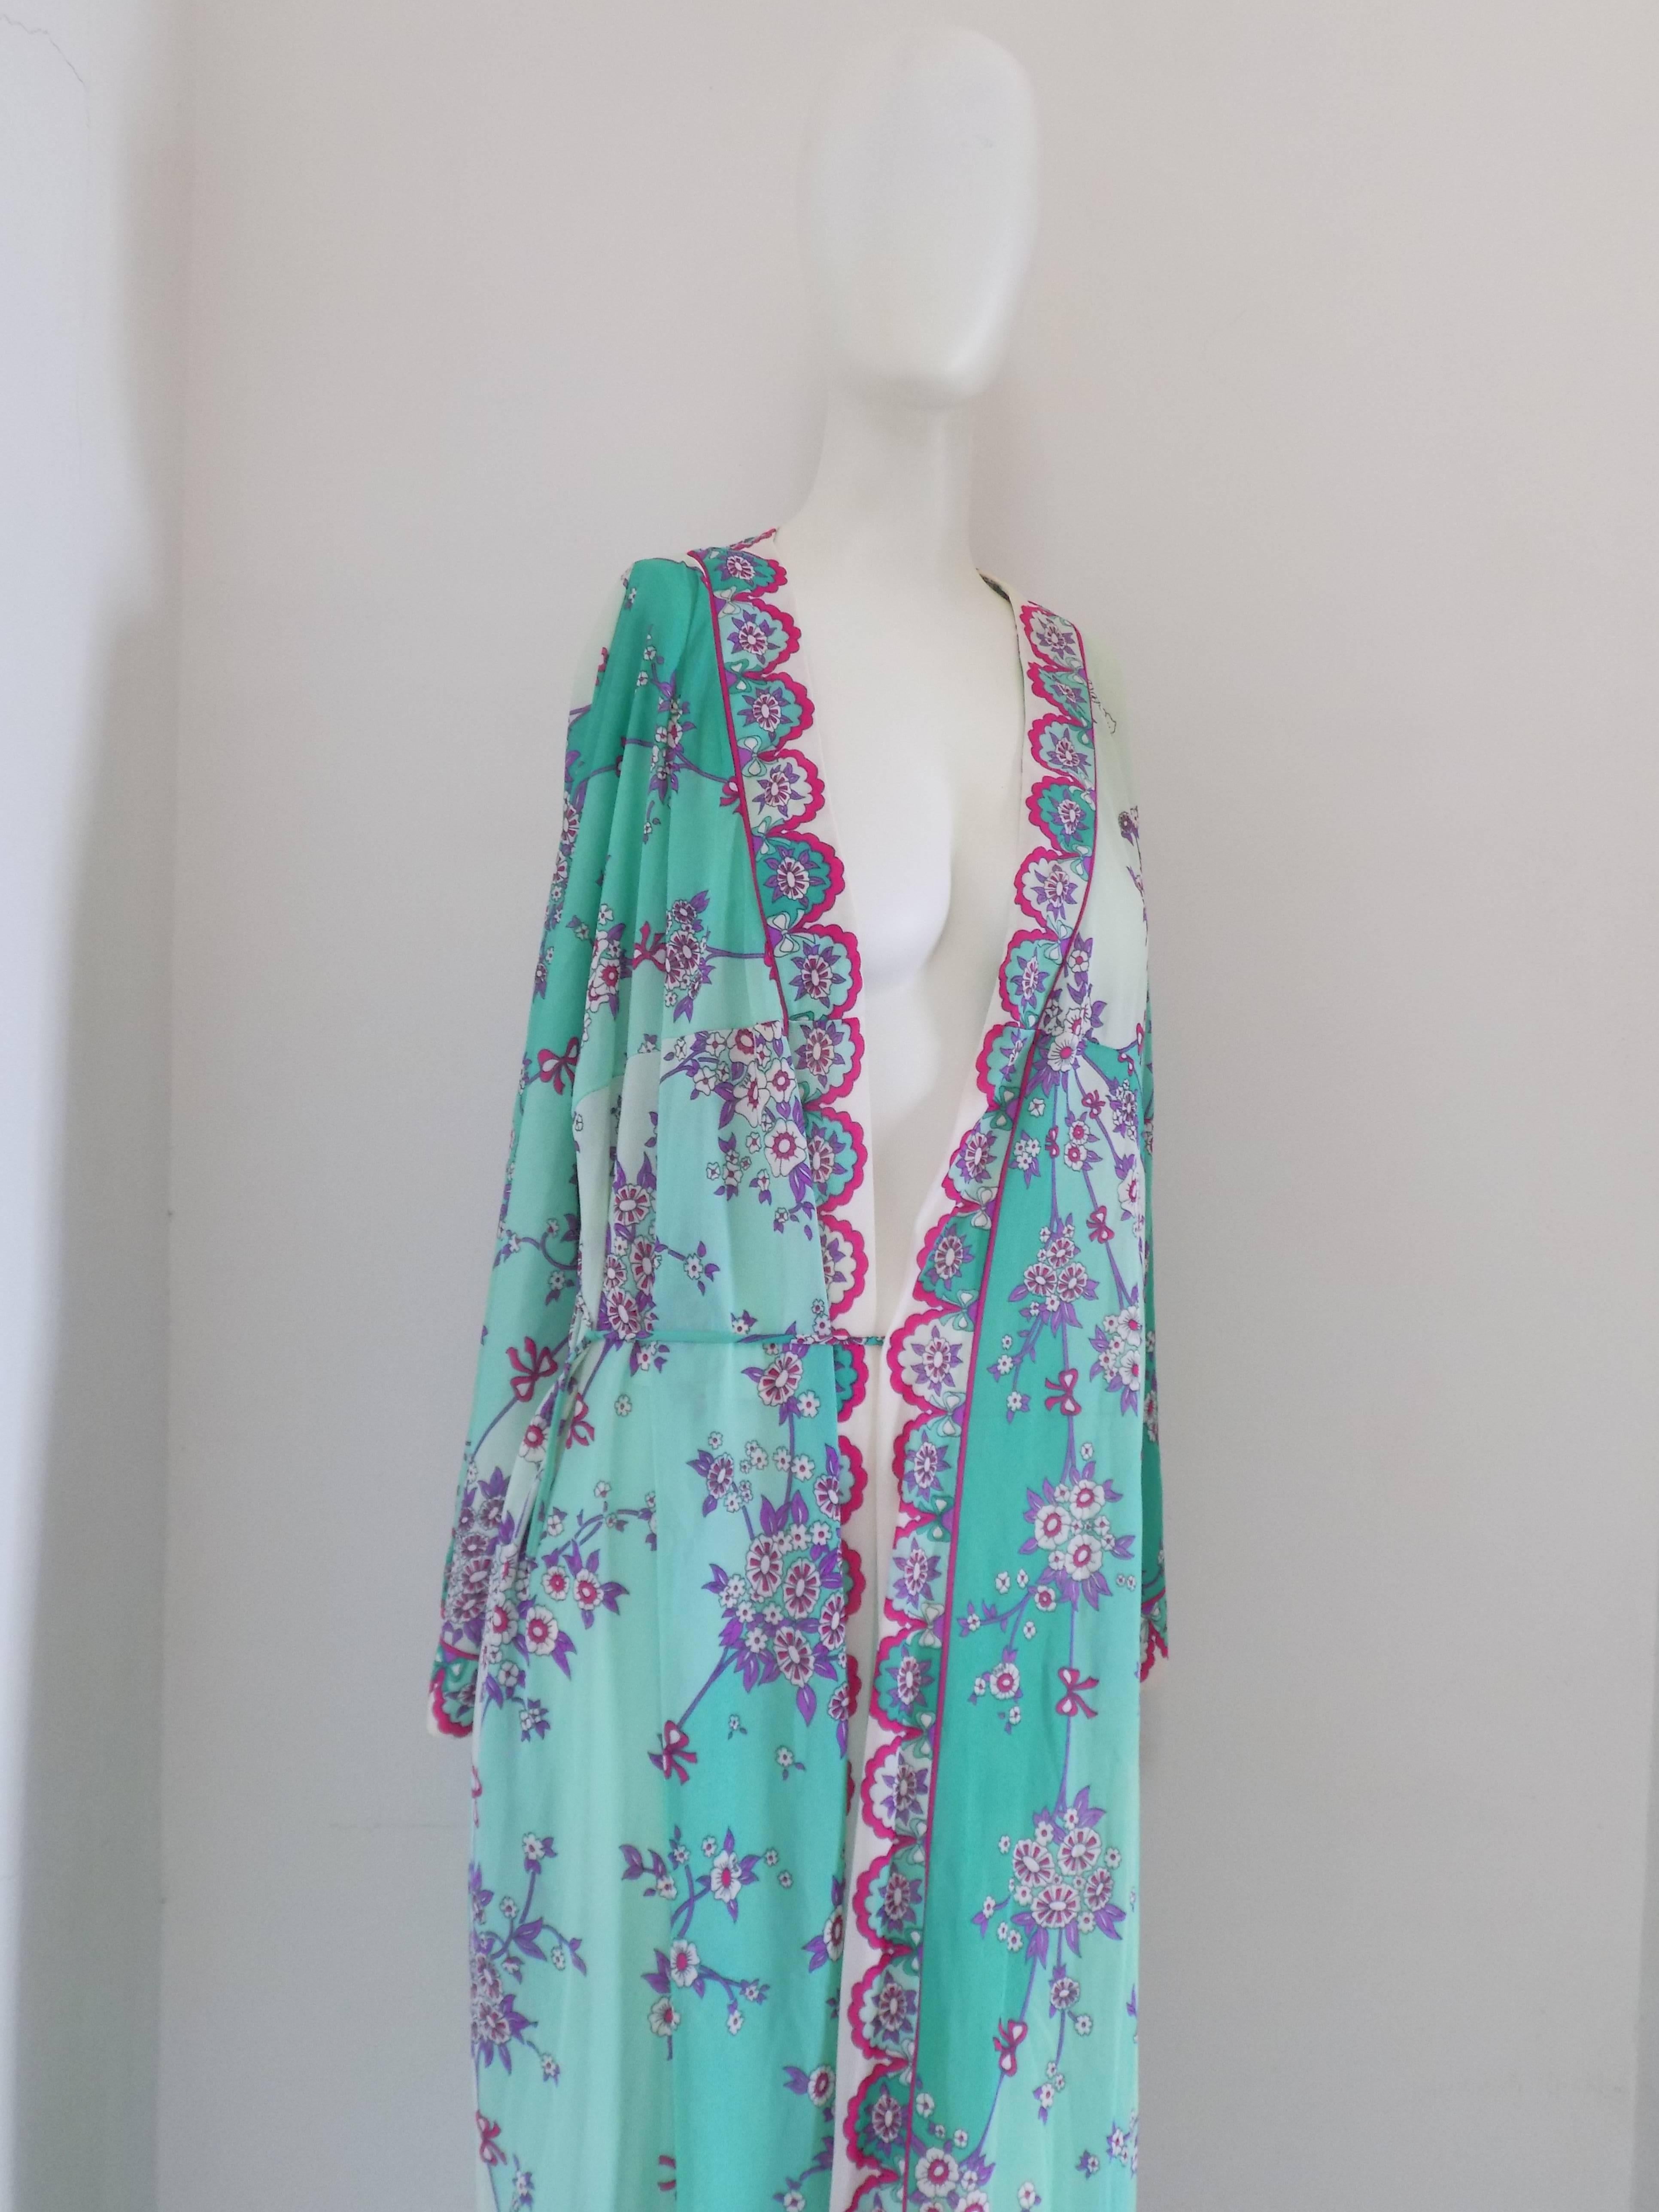 1980s Emilio Pucci for FR long jacket Gown
Flowers Stamp 
Size Large
Totally made in italy